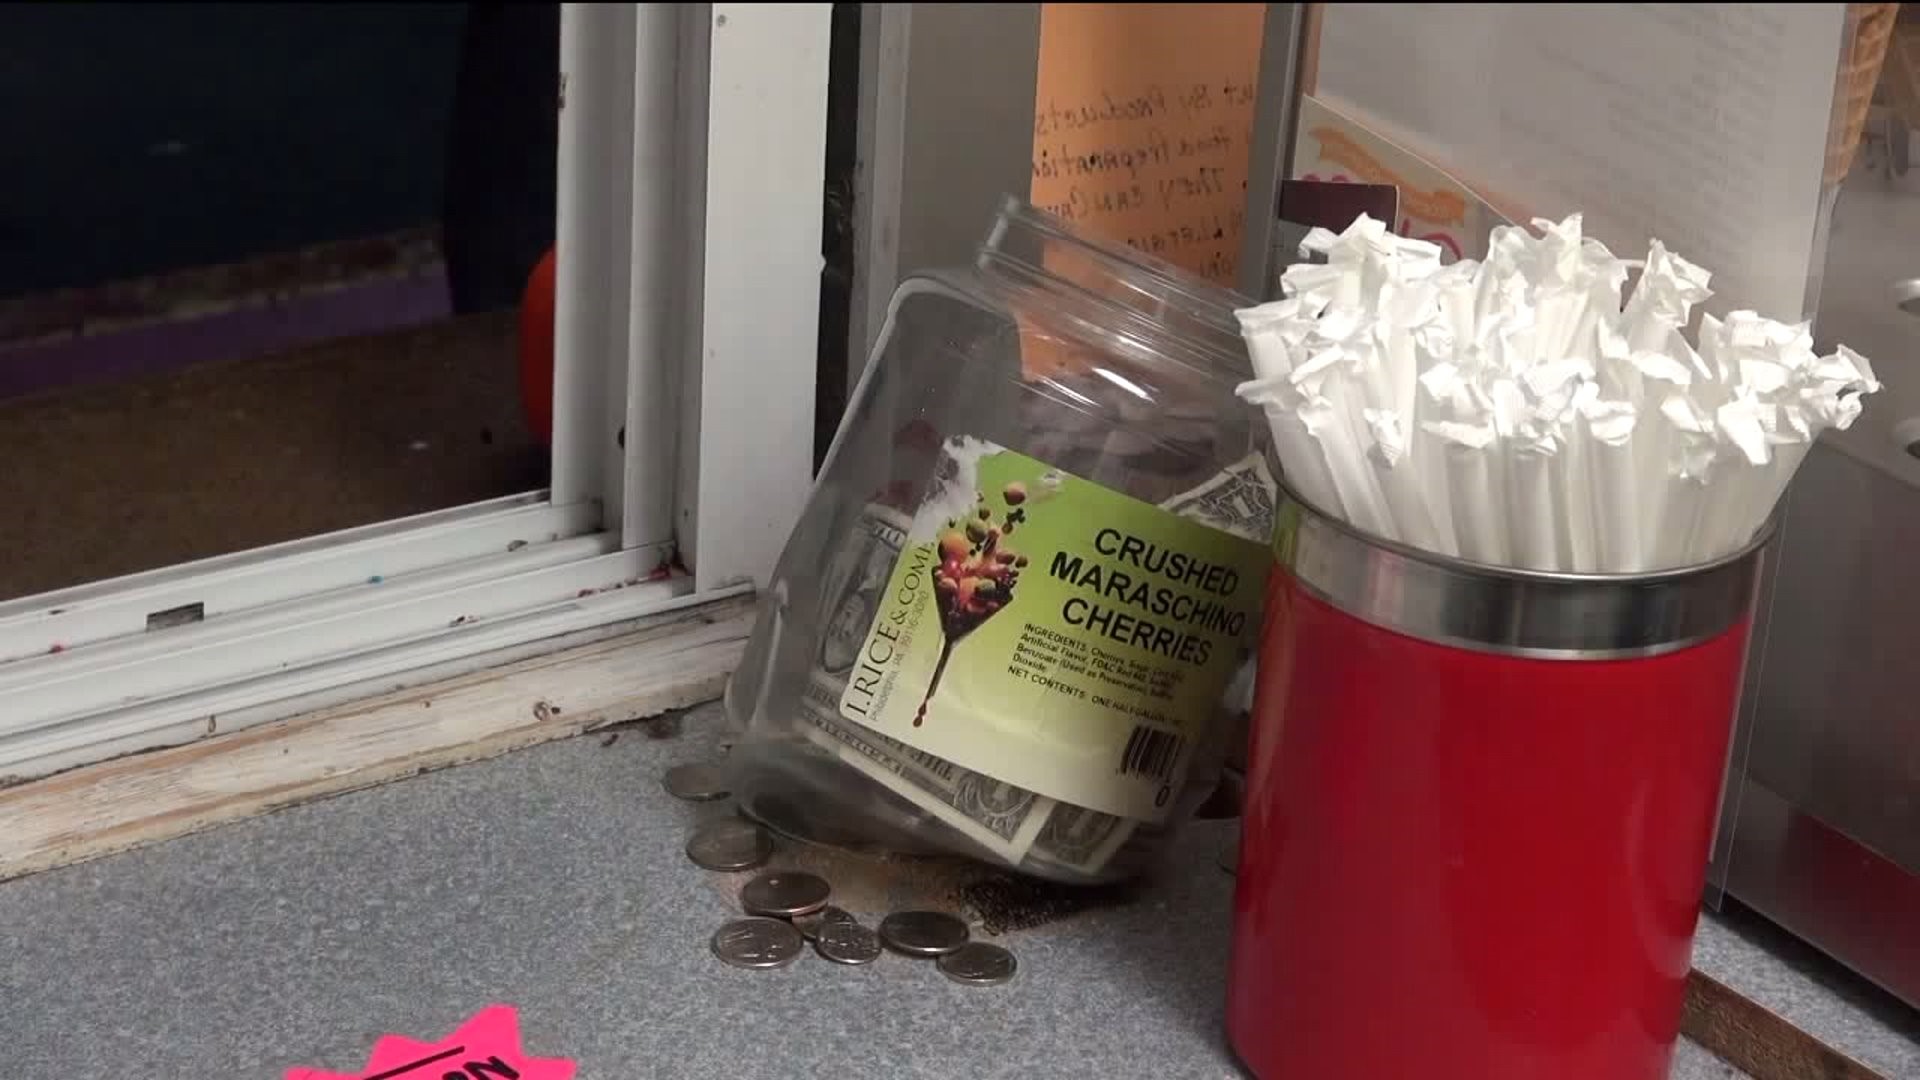 Customers Stop Man Trying to Swipe Tip Jar from Ice Cream Shop